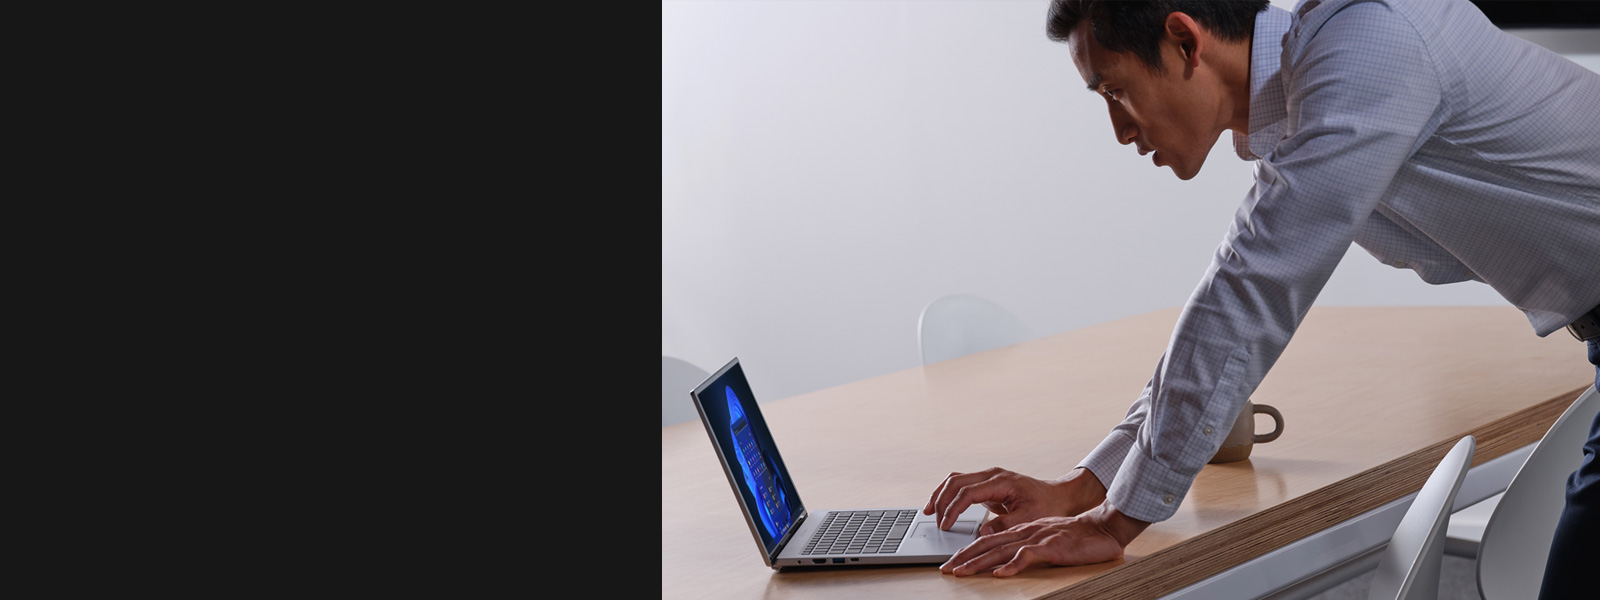 A man leaning over a table while  using a laptop